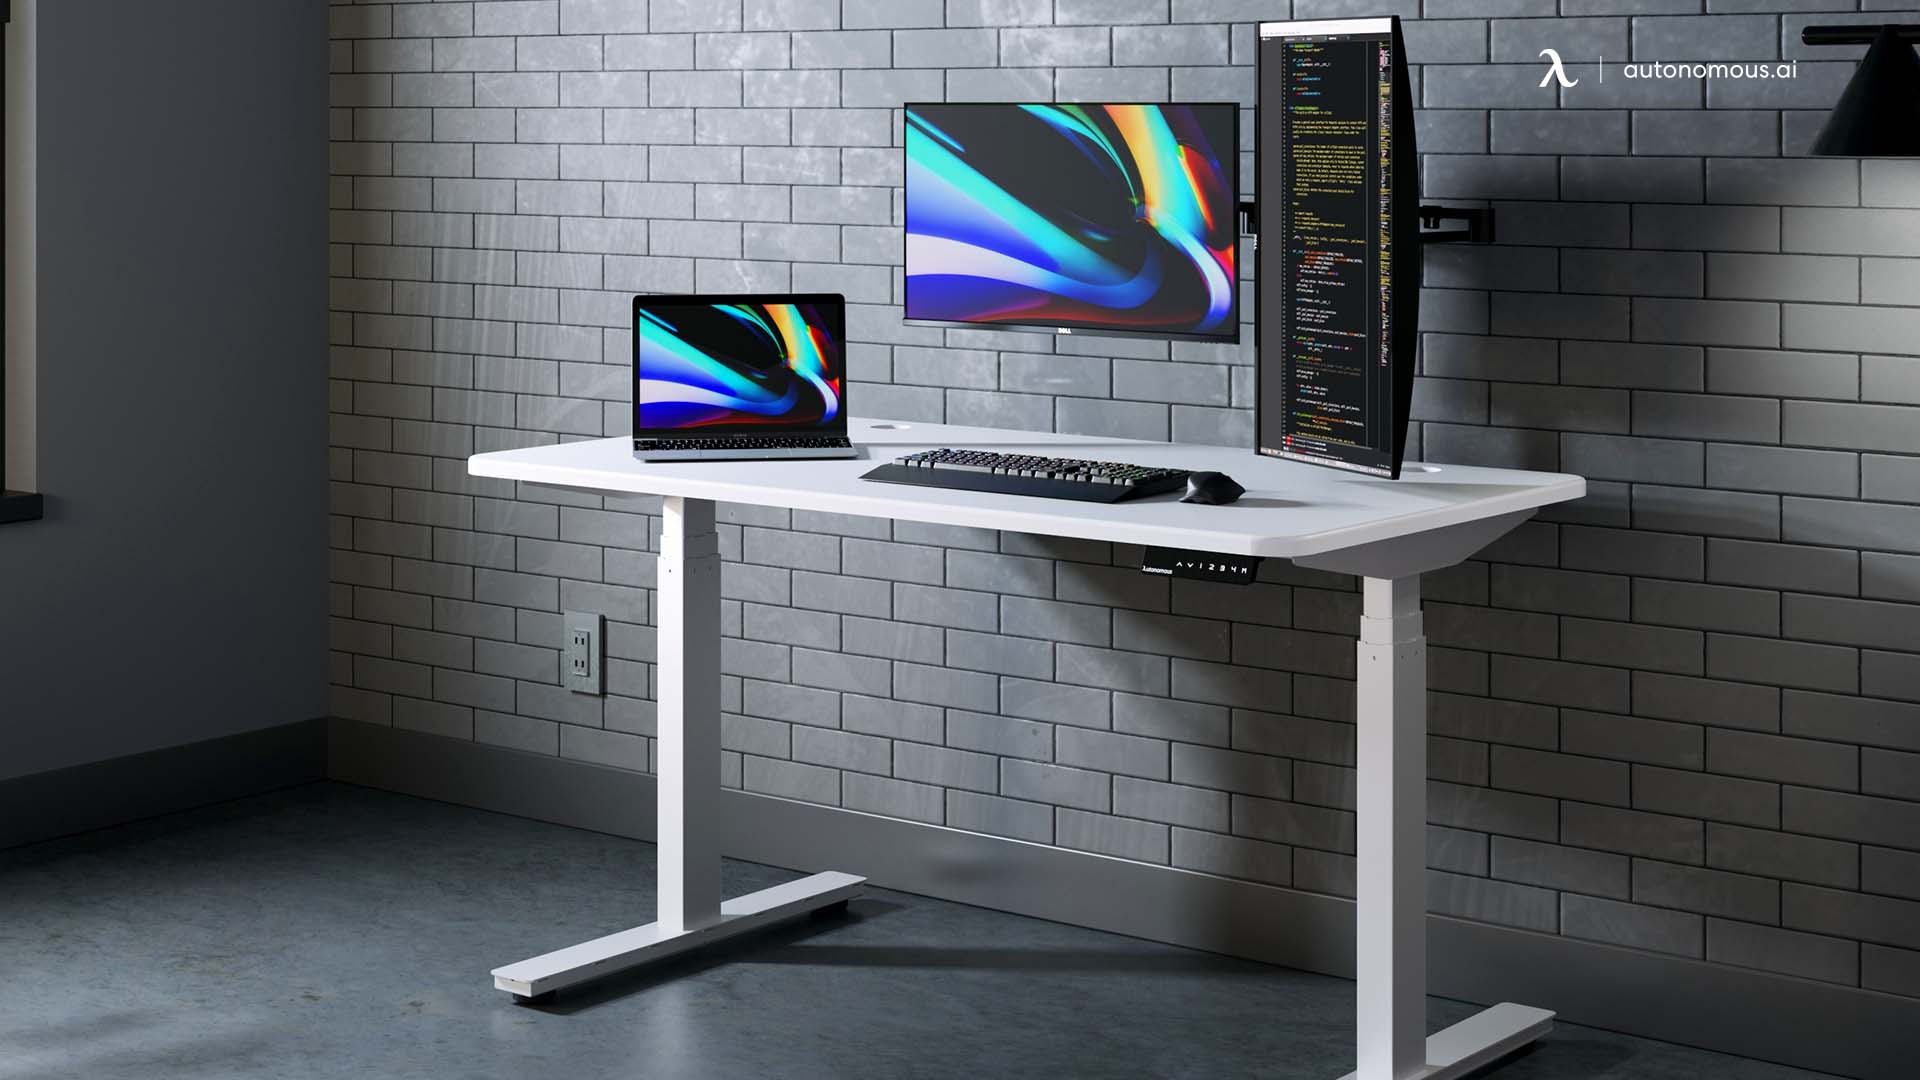 The use of dual monitors promotes efficiency